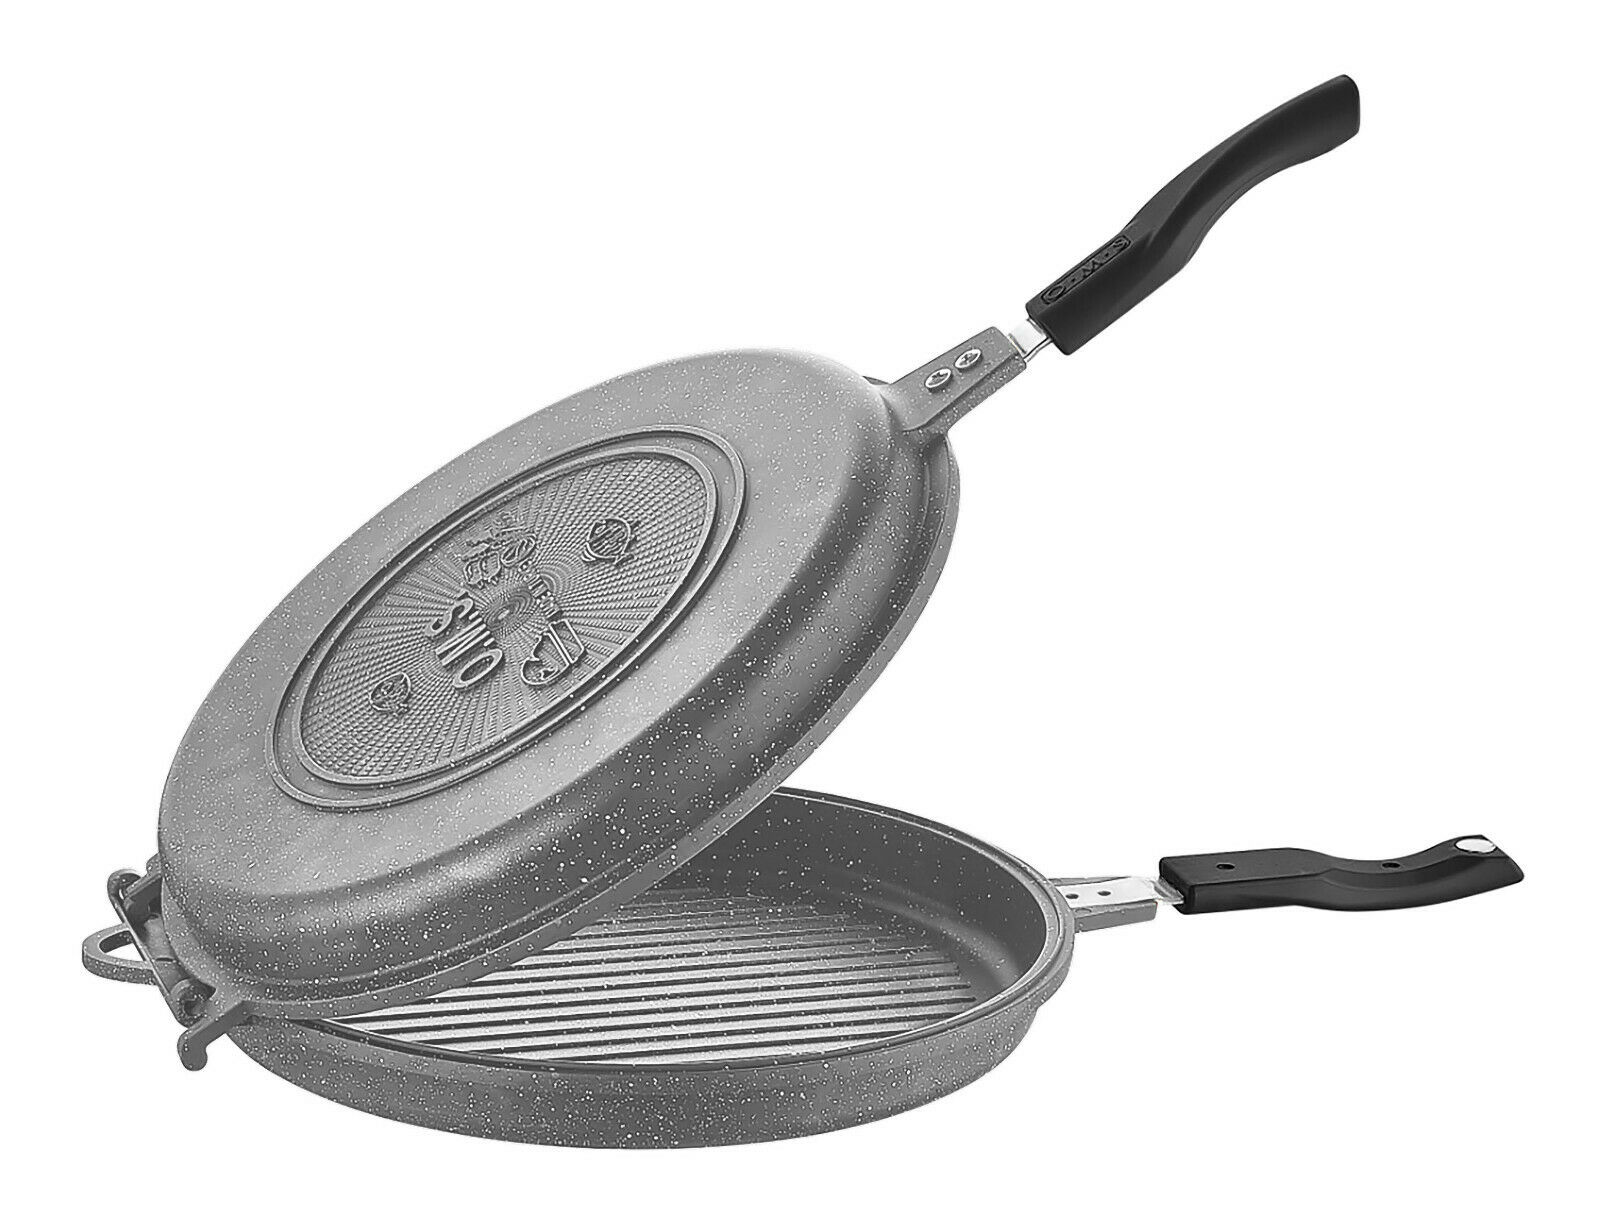 https://www.brandedhousewares.co.uk/wp-content/uploads/2020/07/oms-granite-double-sided-grill-pan-griddle-grey.jpg